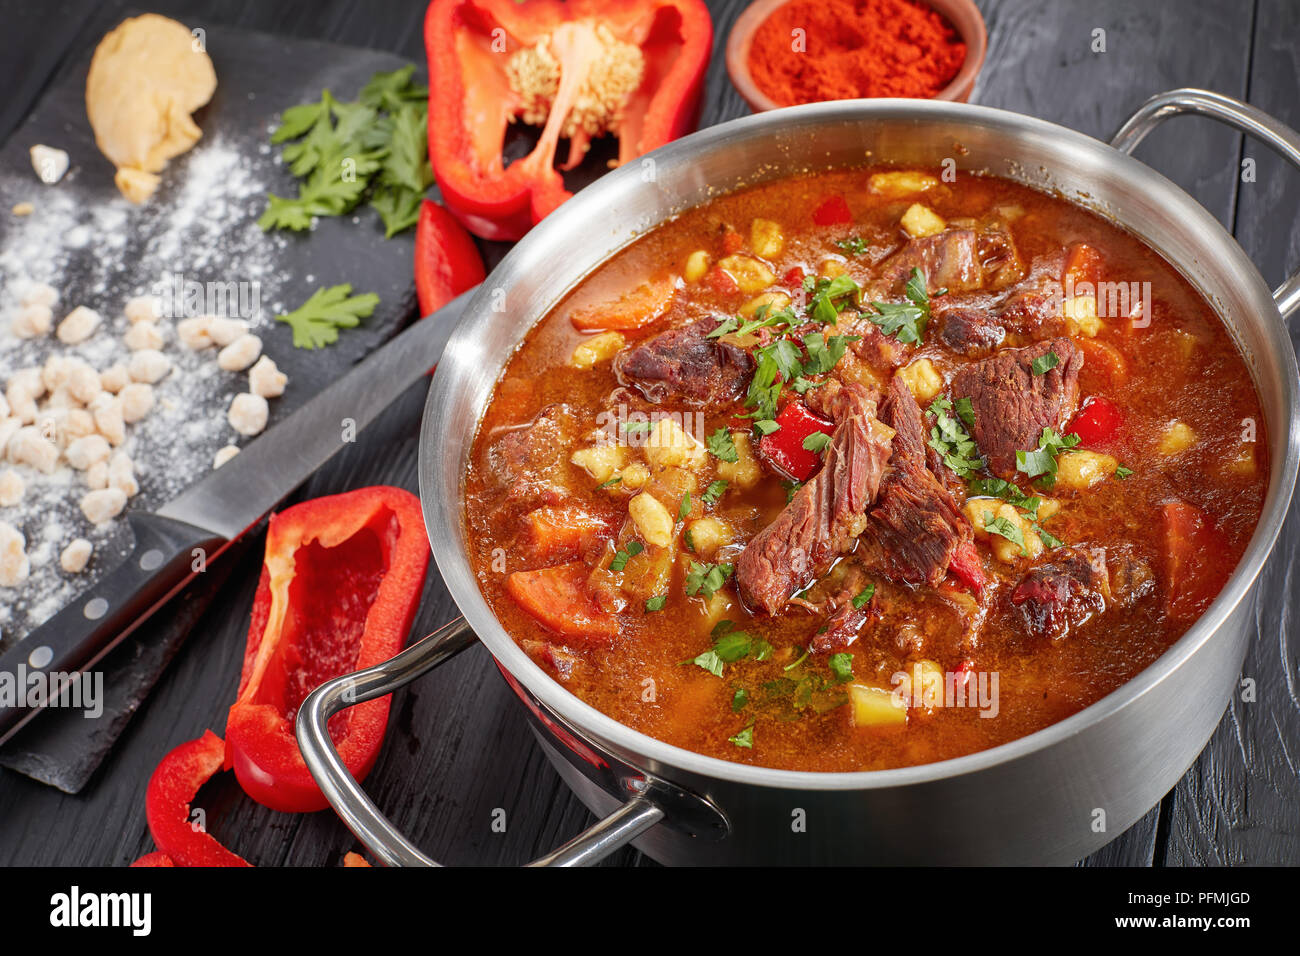 close-up of  hot beef hungarian goulash  or bograch soup with paprika, small egg pasta, vegetables and spices in a pot. ingredients and soup ladle on  Stock Photo